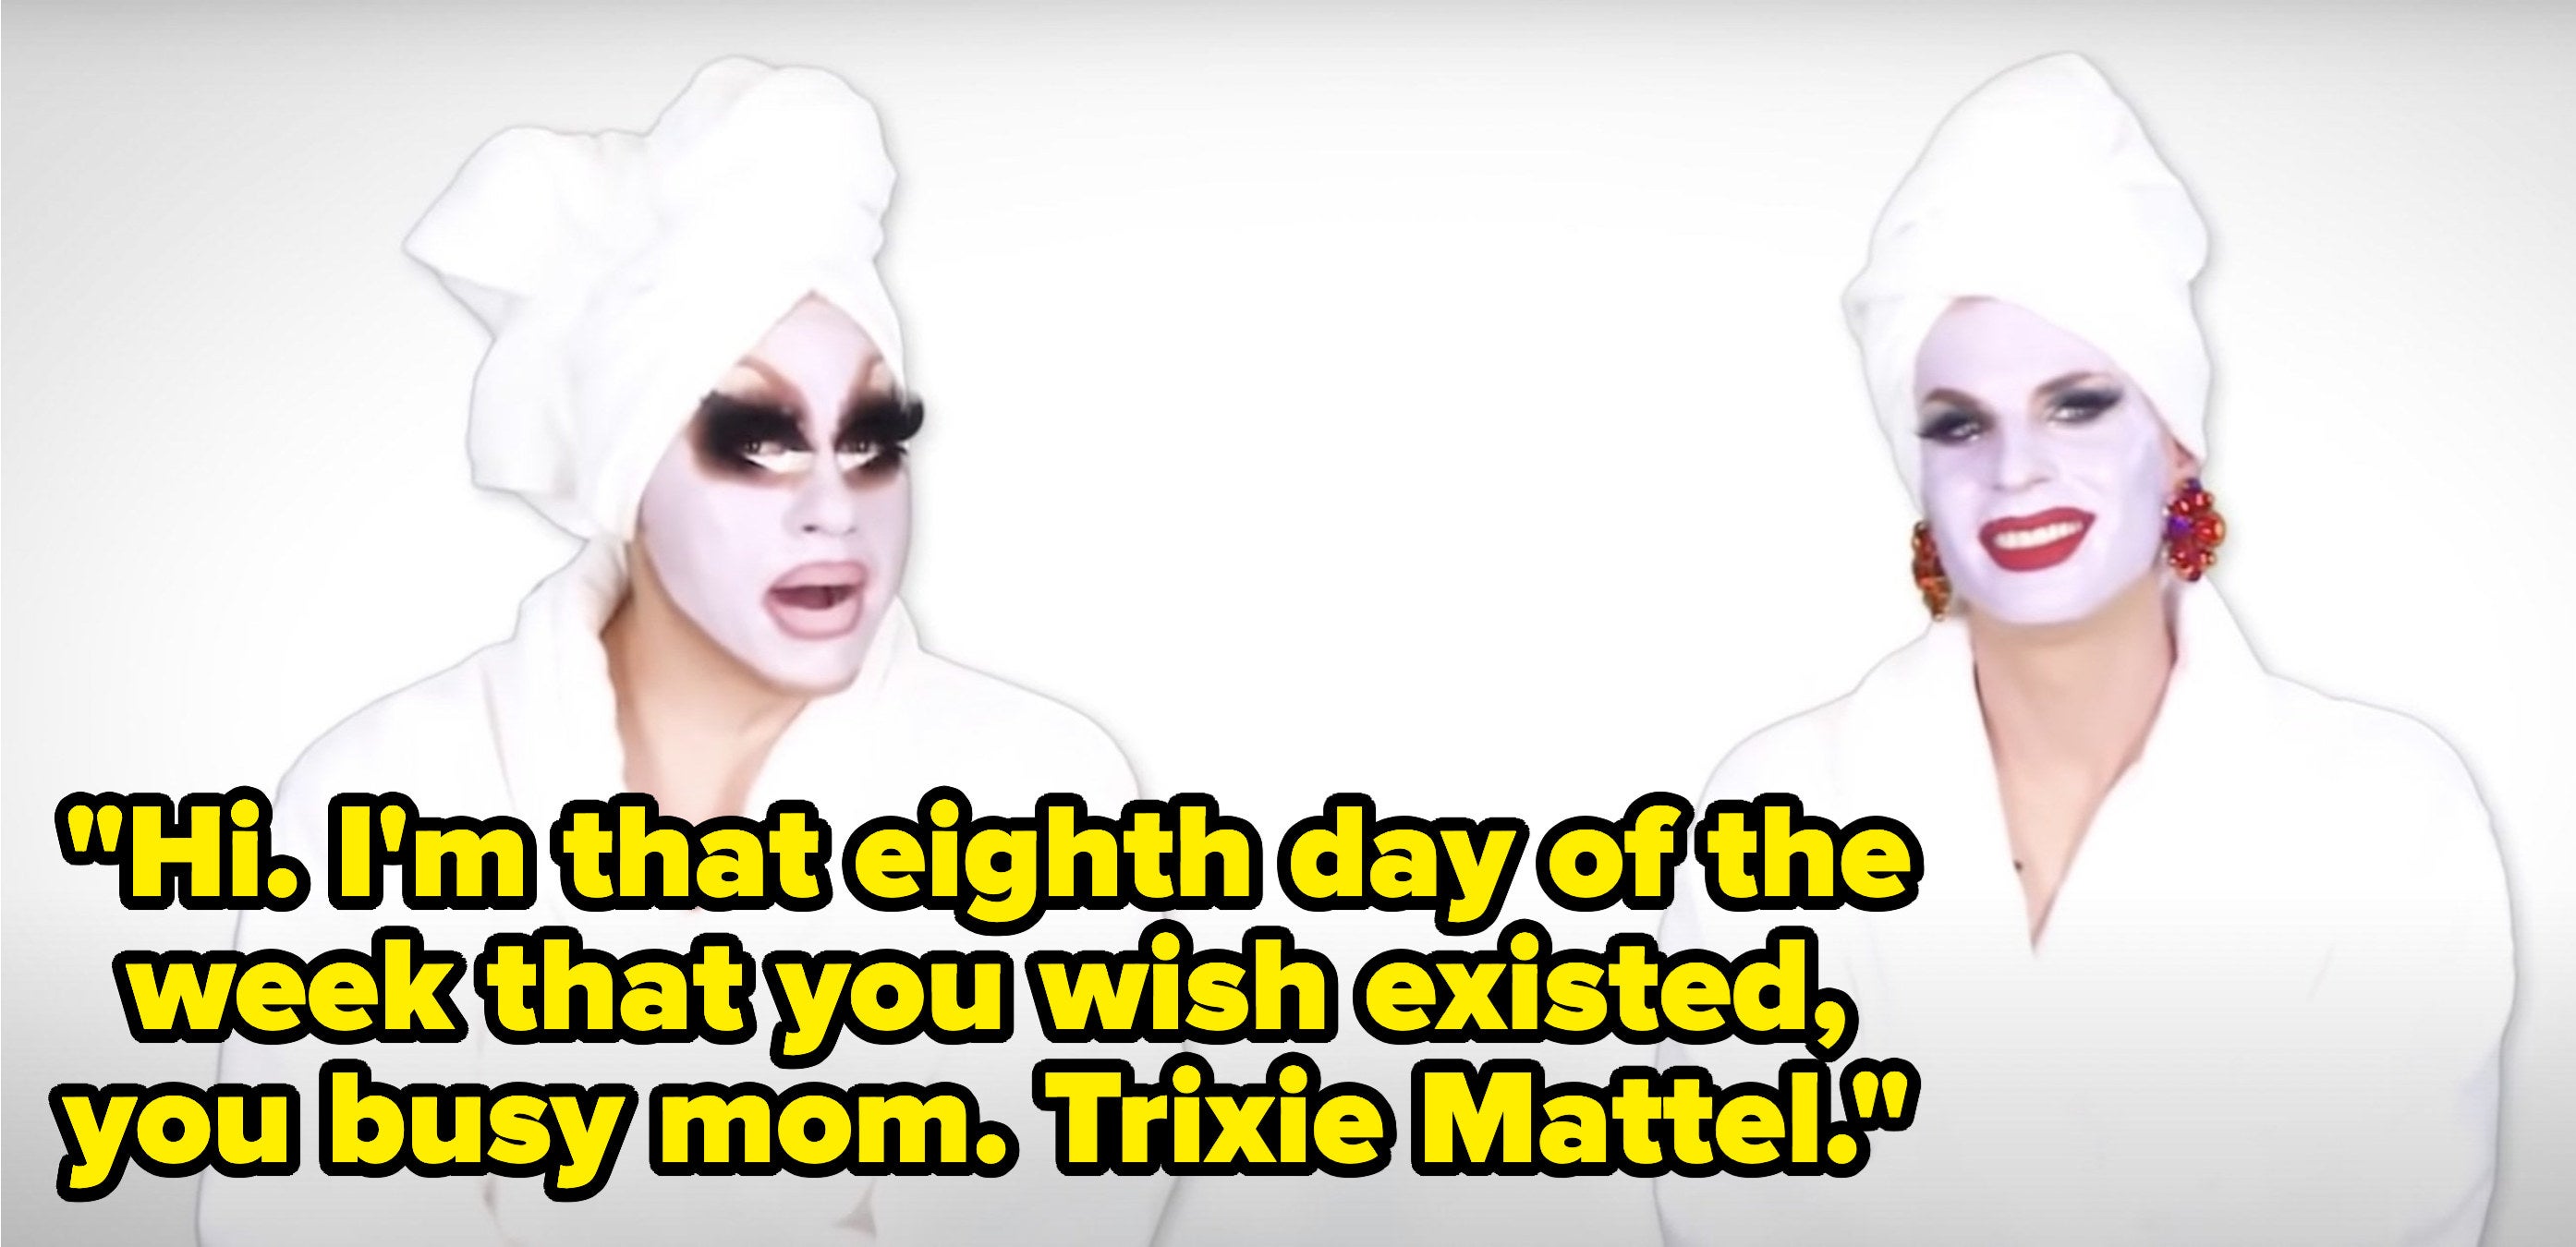 Trixie says, &quot;Hi, Im that eighth day of the week that you wish existed, you busy mom, Trixie Mattel